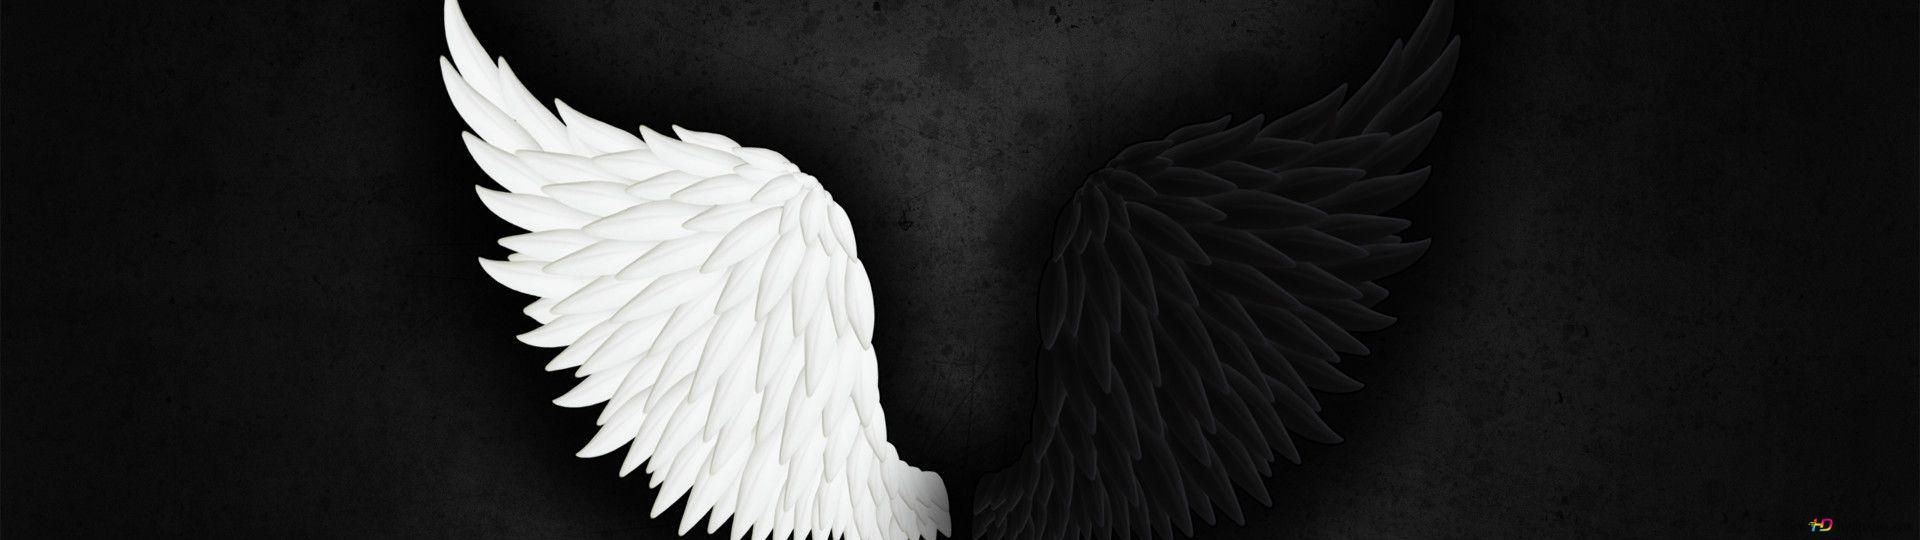 Black and white angel wing HD wallpaper download